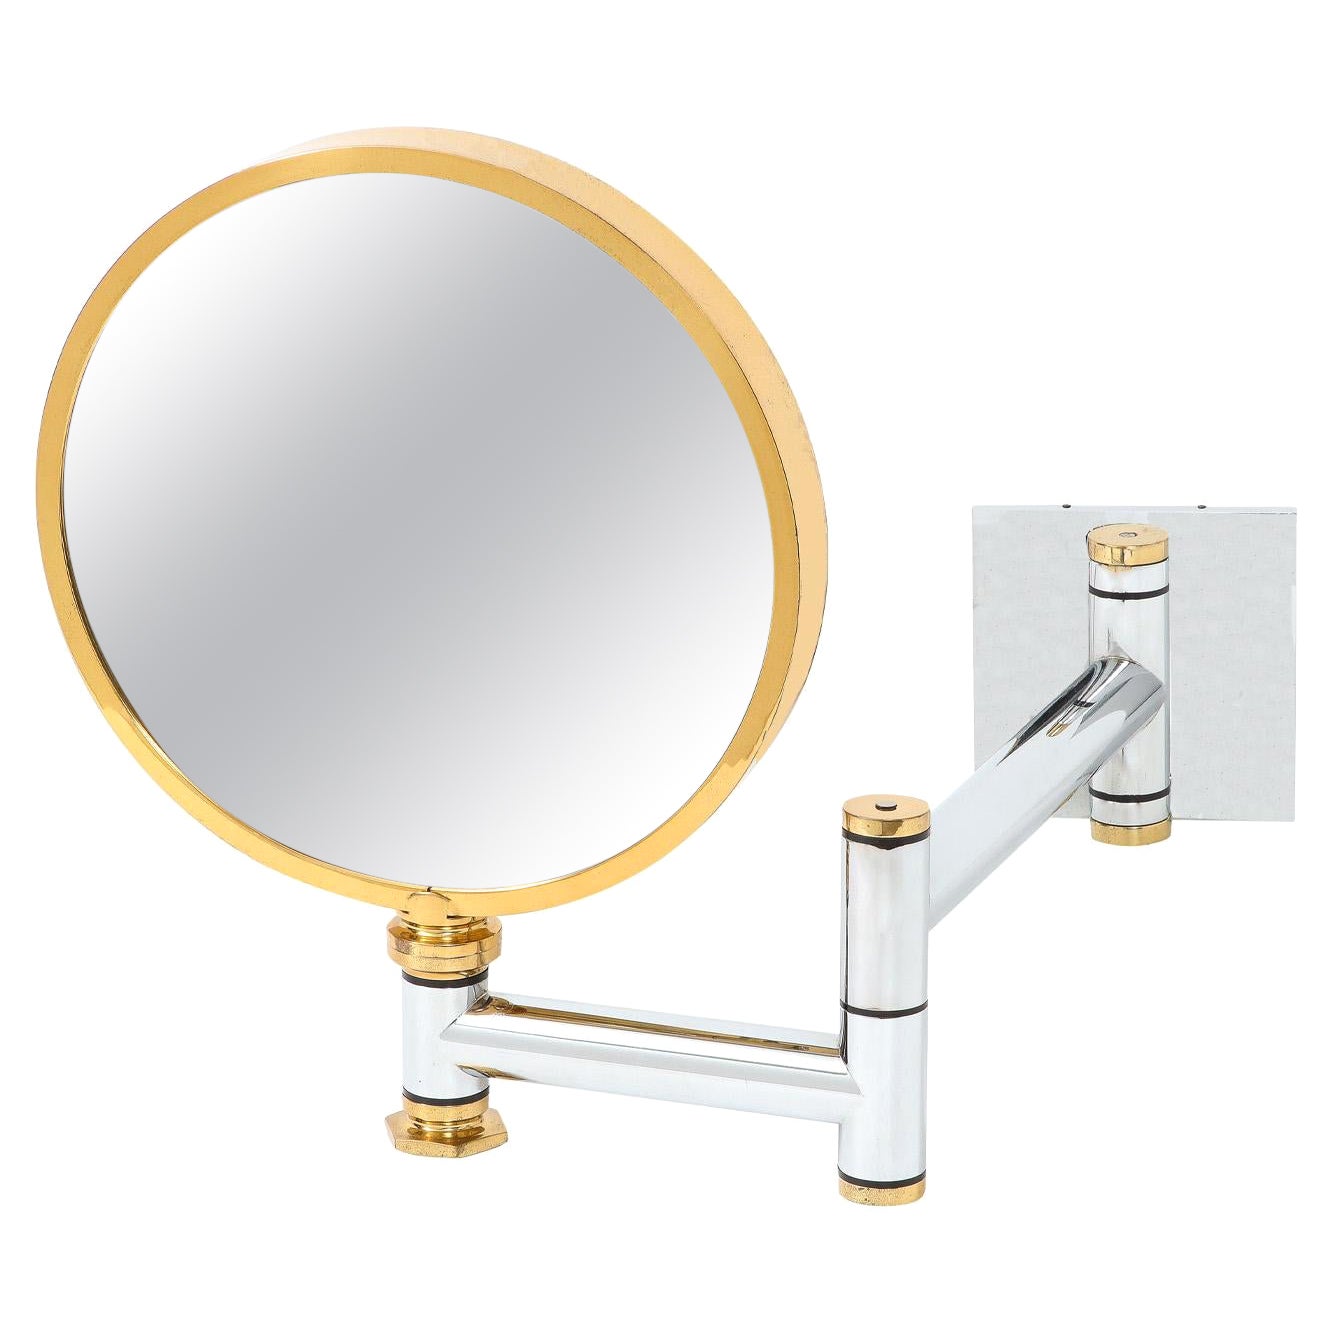 Karl Springer Rare Wall-Mounted Mirror in Polished Chrome and Brass 1980s For Sale